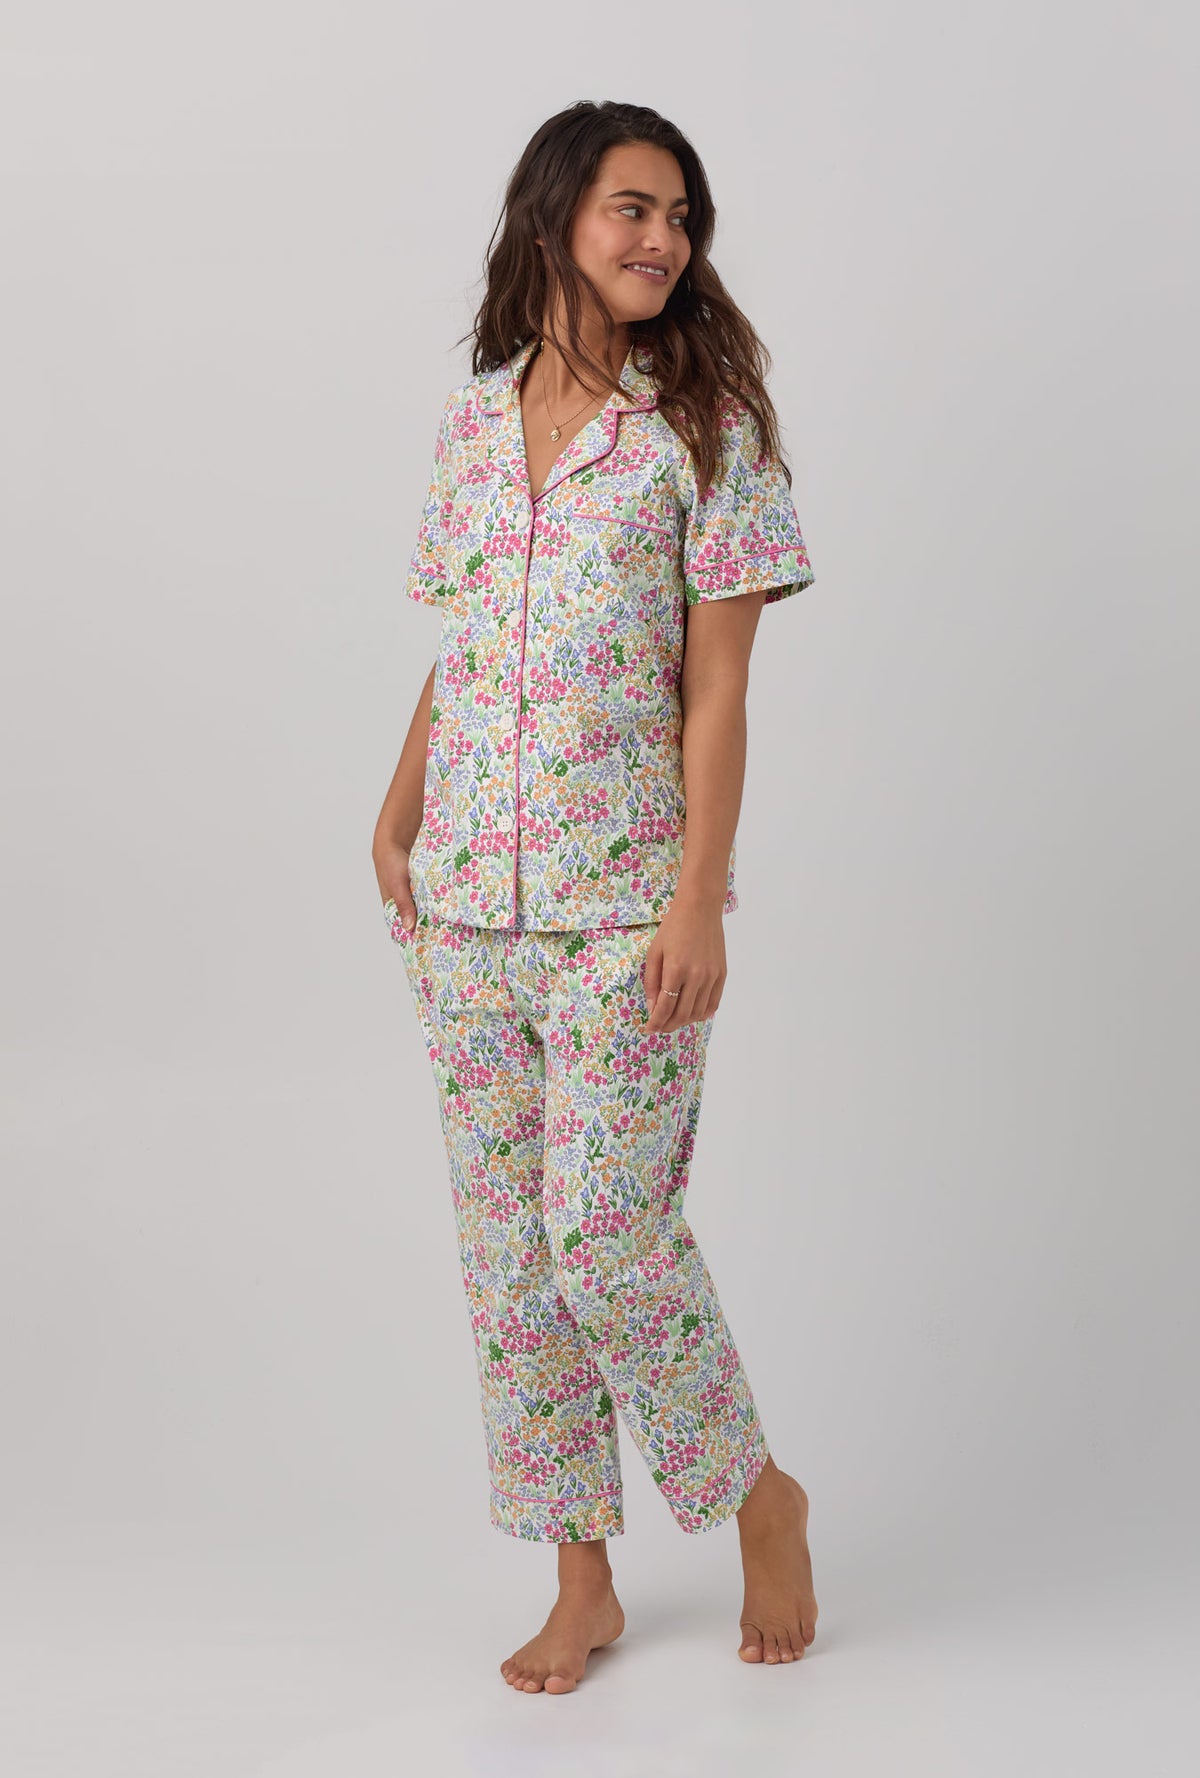 A lady wearing multi color shoe=rt sleeve clasic stretch jersey cropped pj set with cottage garden print.